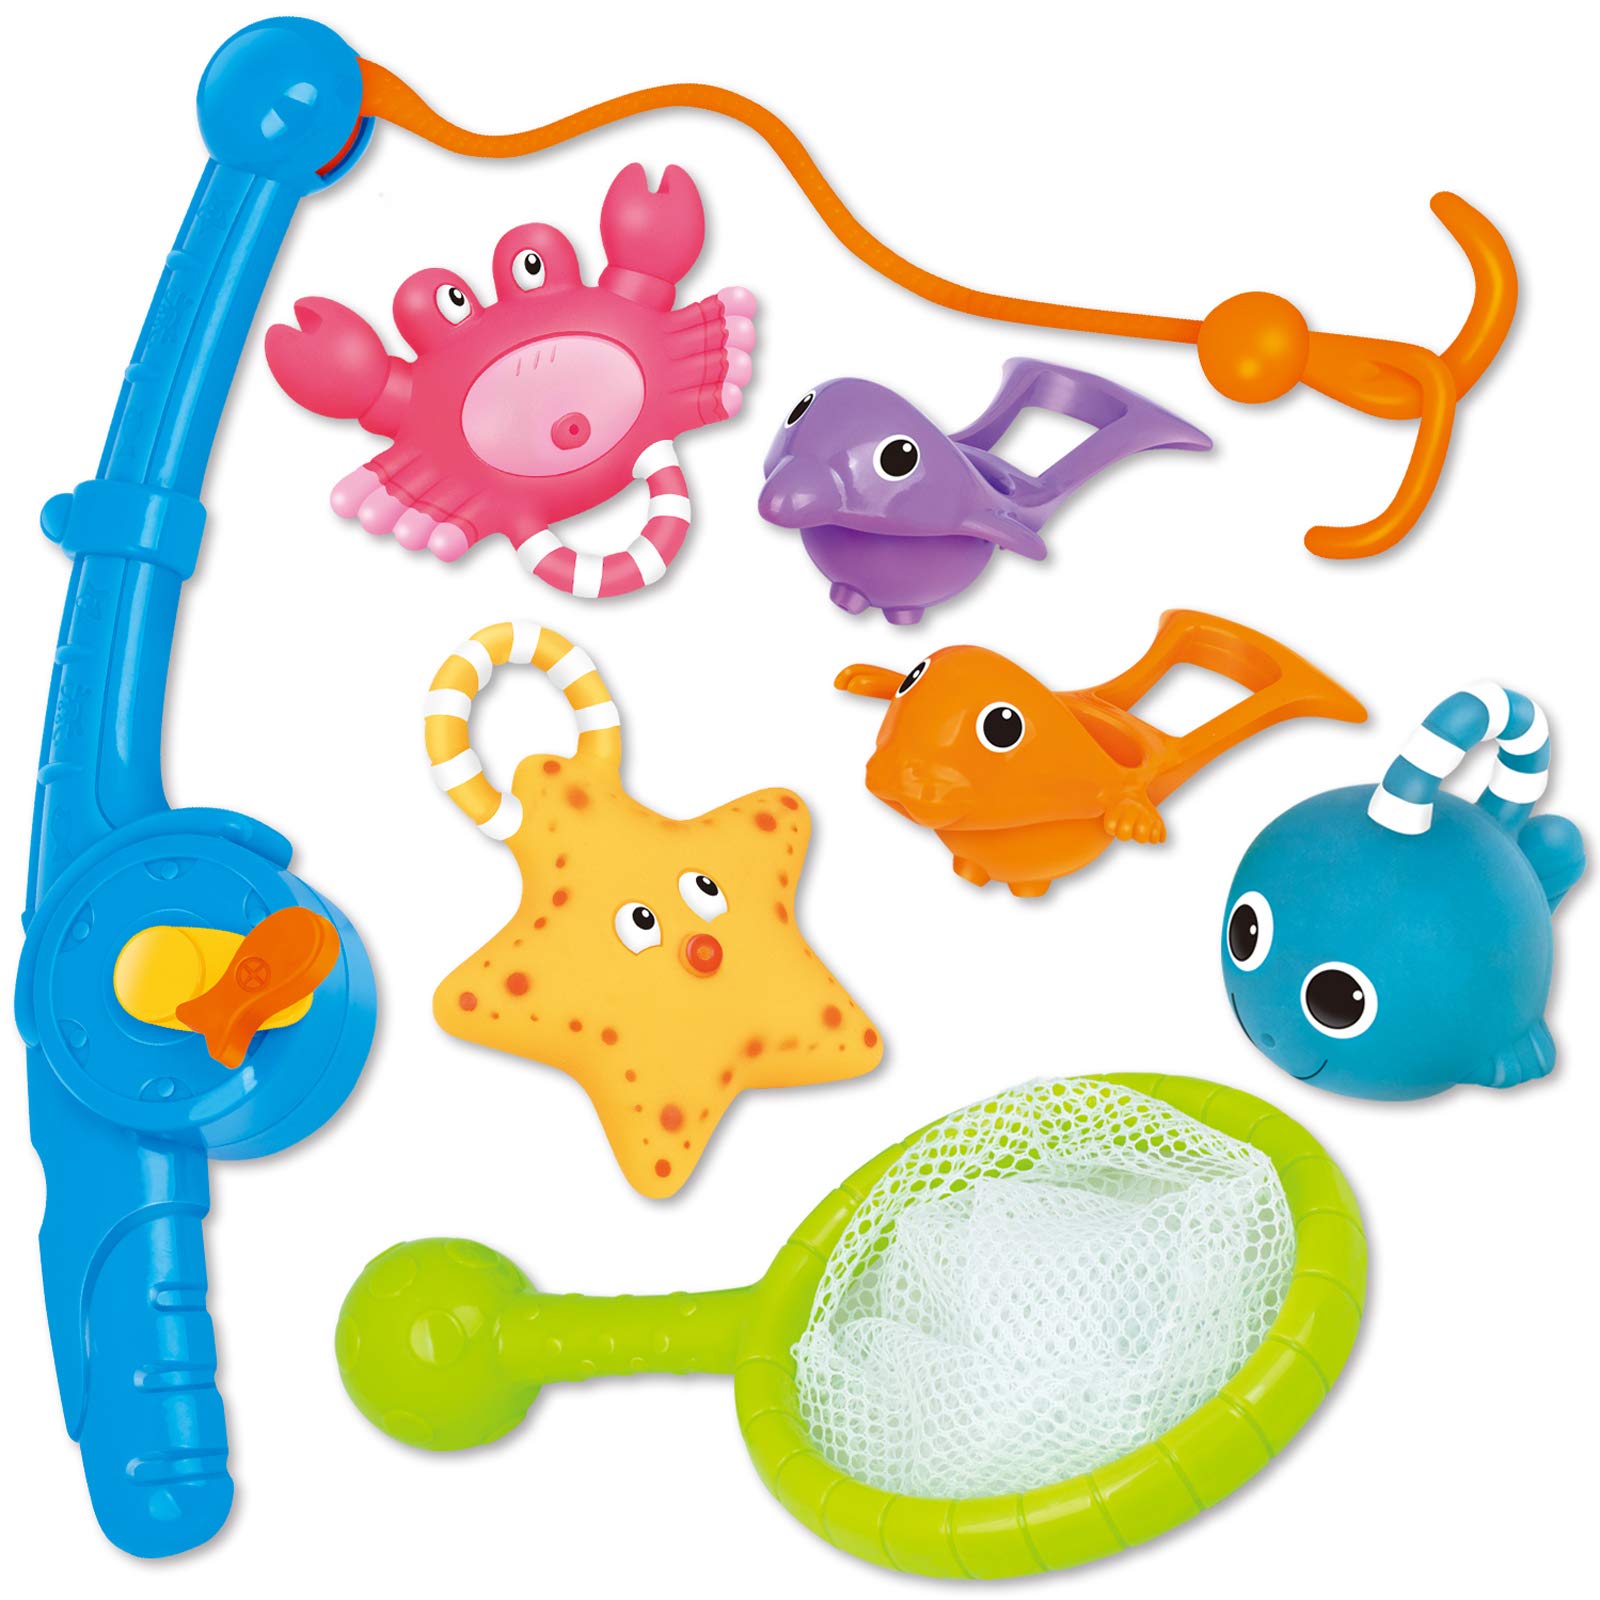 KarberDark Bath Toy, Fishing Floating Squirts Toy and Water Scoop with Organizer Bag(8 Pack), Fish Net Game in Bathtub Bathroom Pool Bath Time for Kids Toddler Baby Boys Girls, Bath Tub Spoon